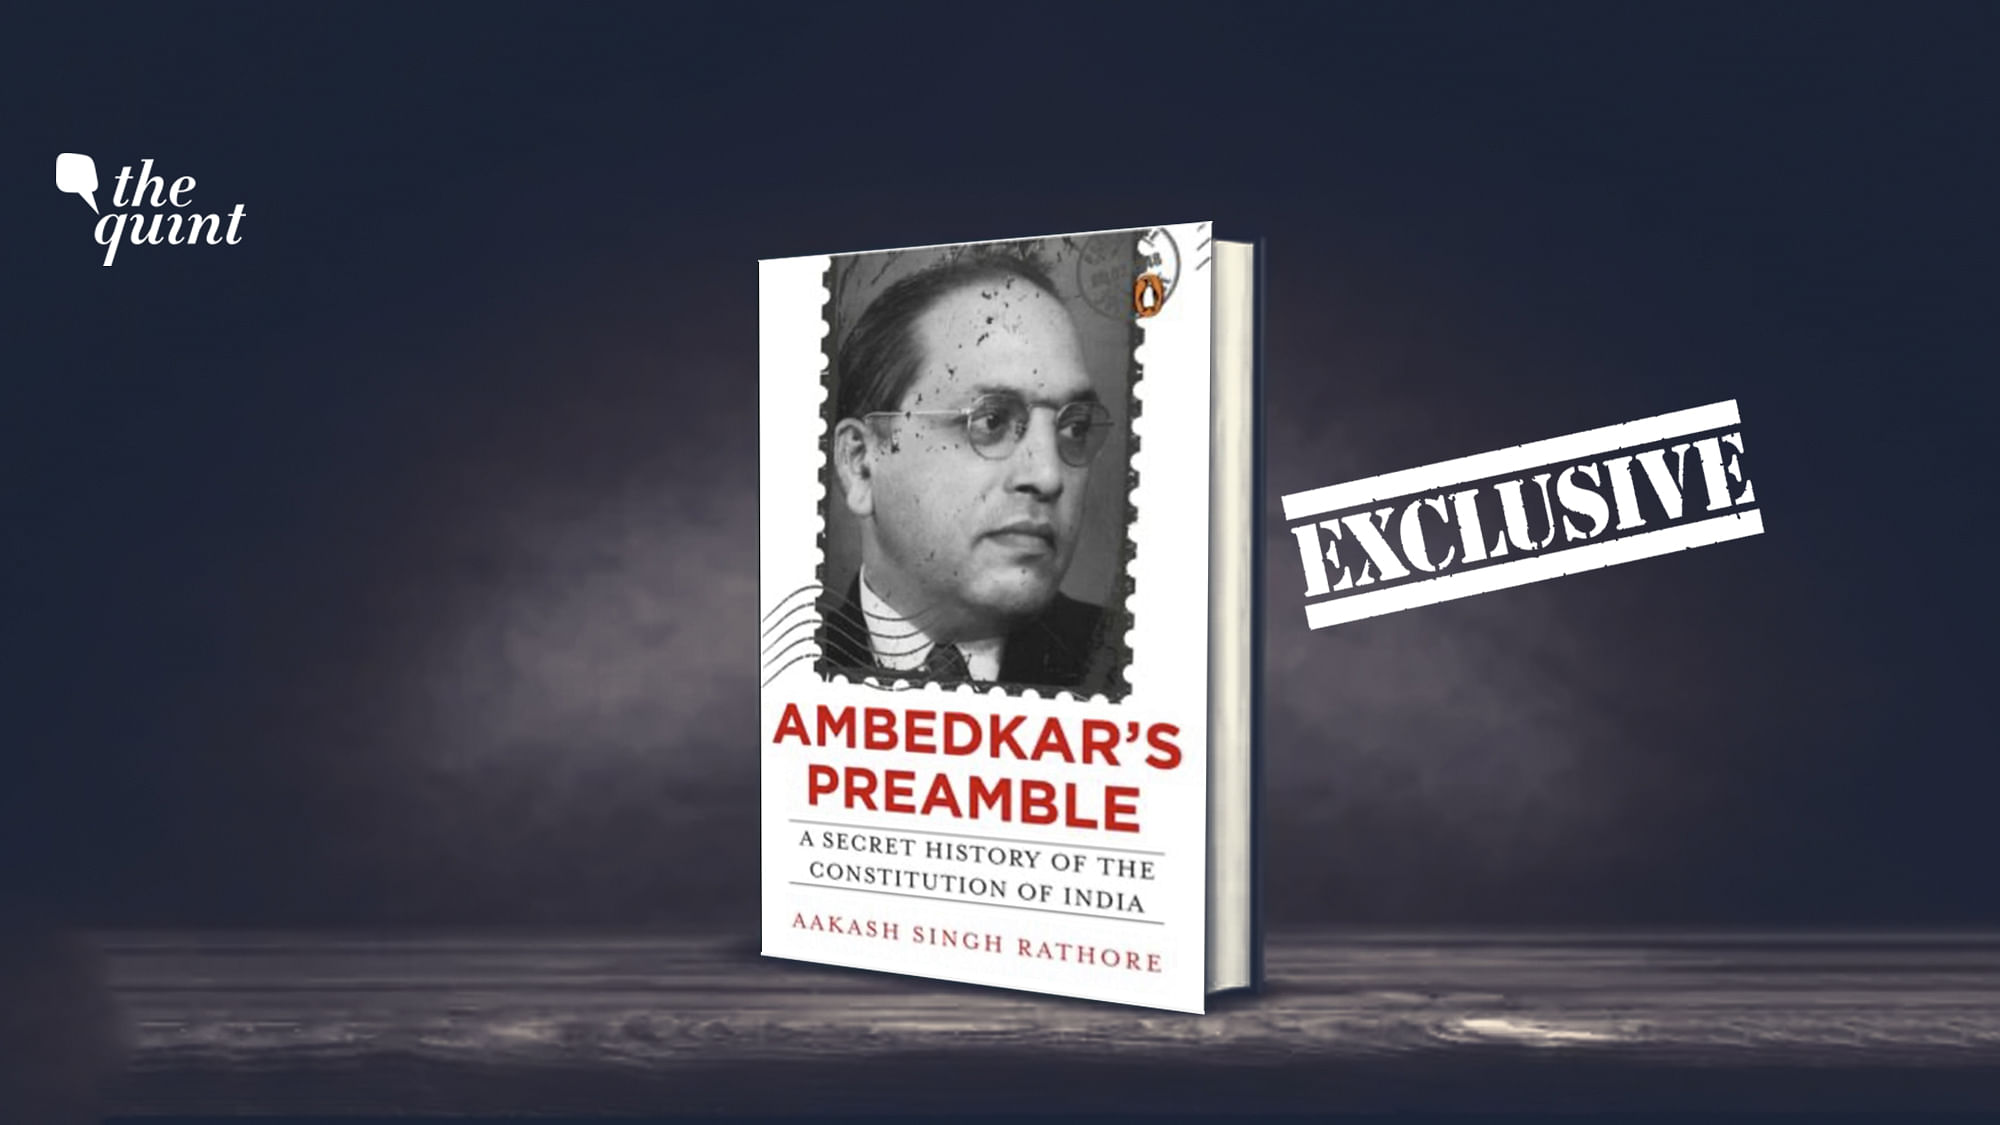 New book on Dr Ambedkar by scholar Aakash Singh Rathore suggests that unlike for B.N. Rau and Nehru, each and every one of the Preamble’s central concepts—justice, liberty, equality, fraternity, dignity and nation—is derived from his writings and speeches.